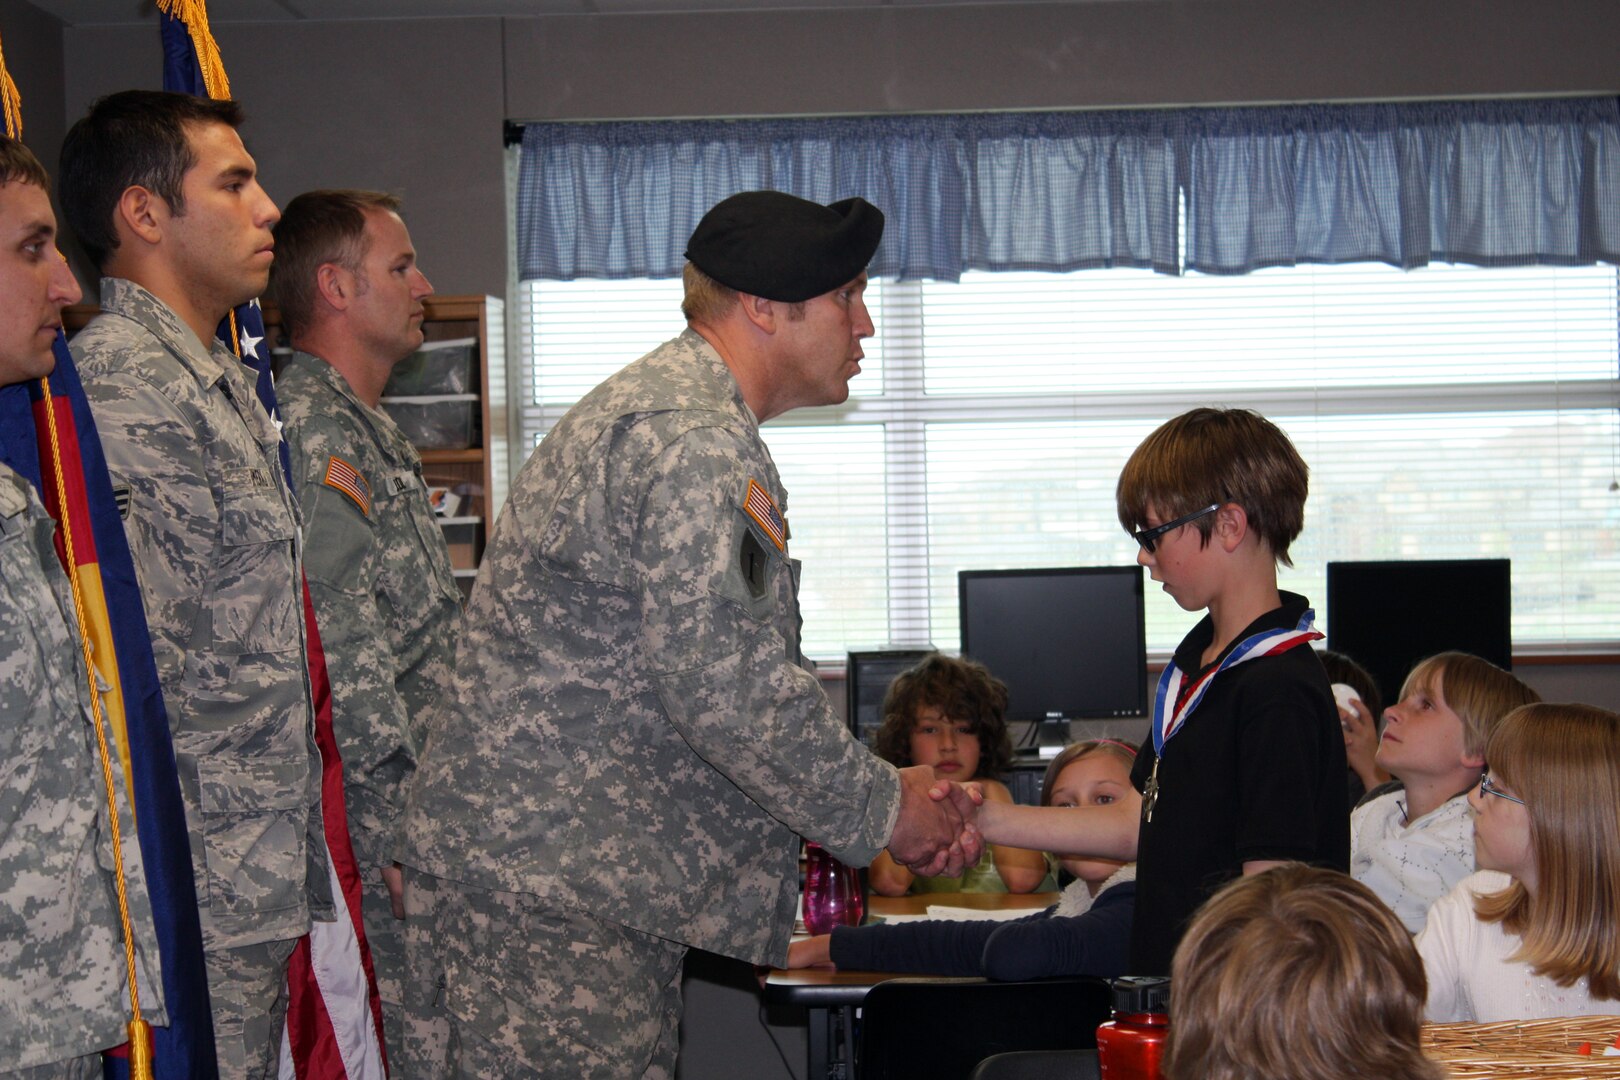 Capt. Derwin Allen acknowledges his nine-year-old son Colby after placing the Yellow Ribbon Program's hero medal around his neck during a ceremony in Colby's fourth-grade class at Lone Tree Elementary School on June 2, 2009. The hero medal acknowledges the sons and daughters of deployed parents. Colby's father was deployed to Afghanistan for nine months and he did not see him for a year.